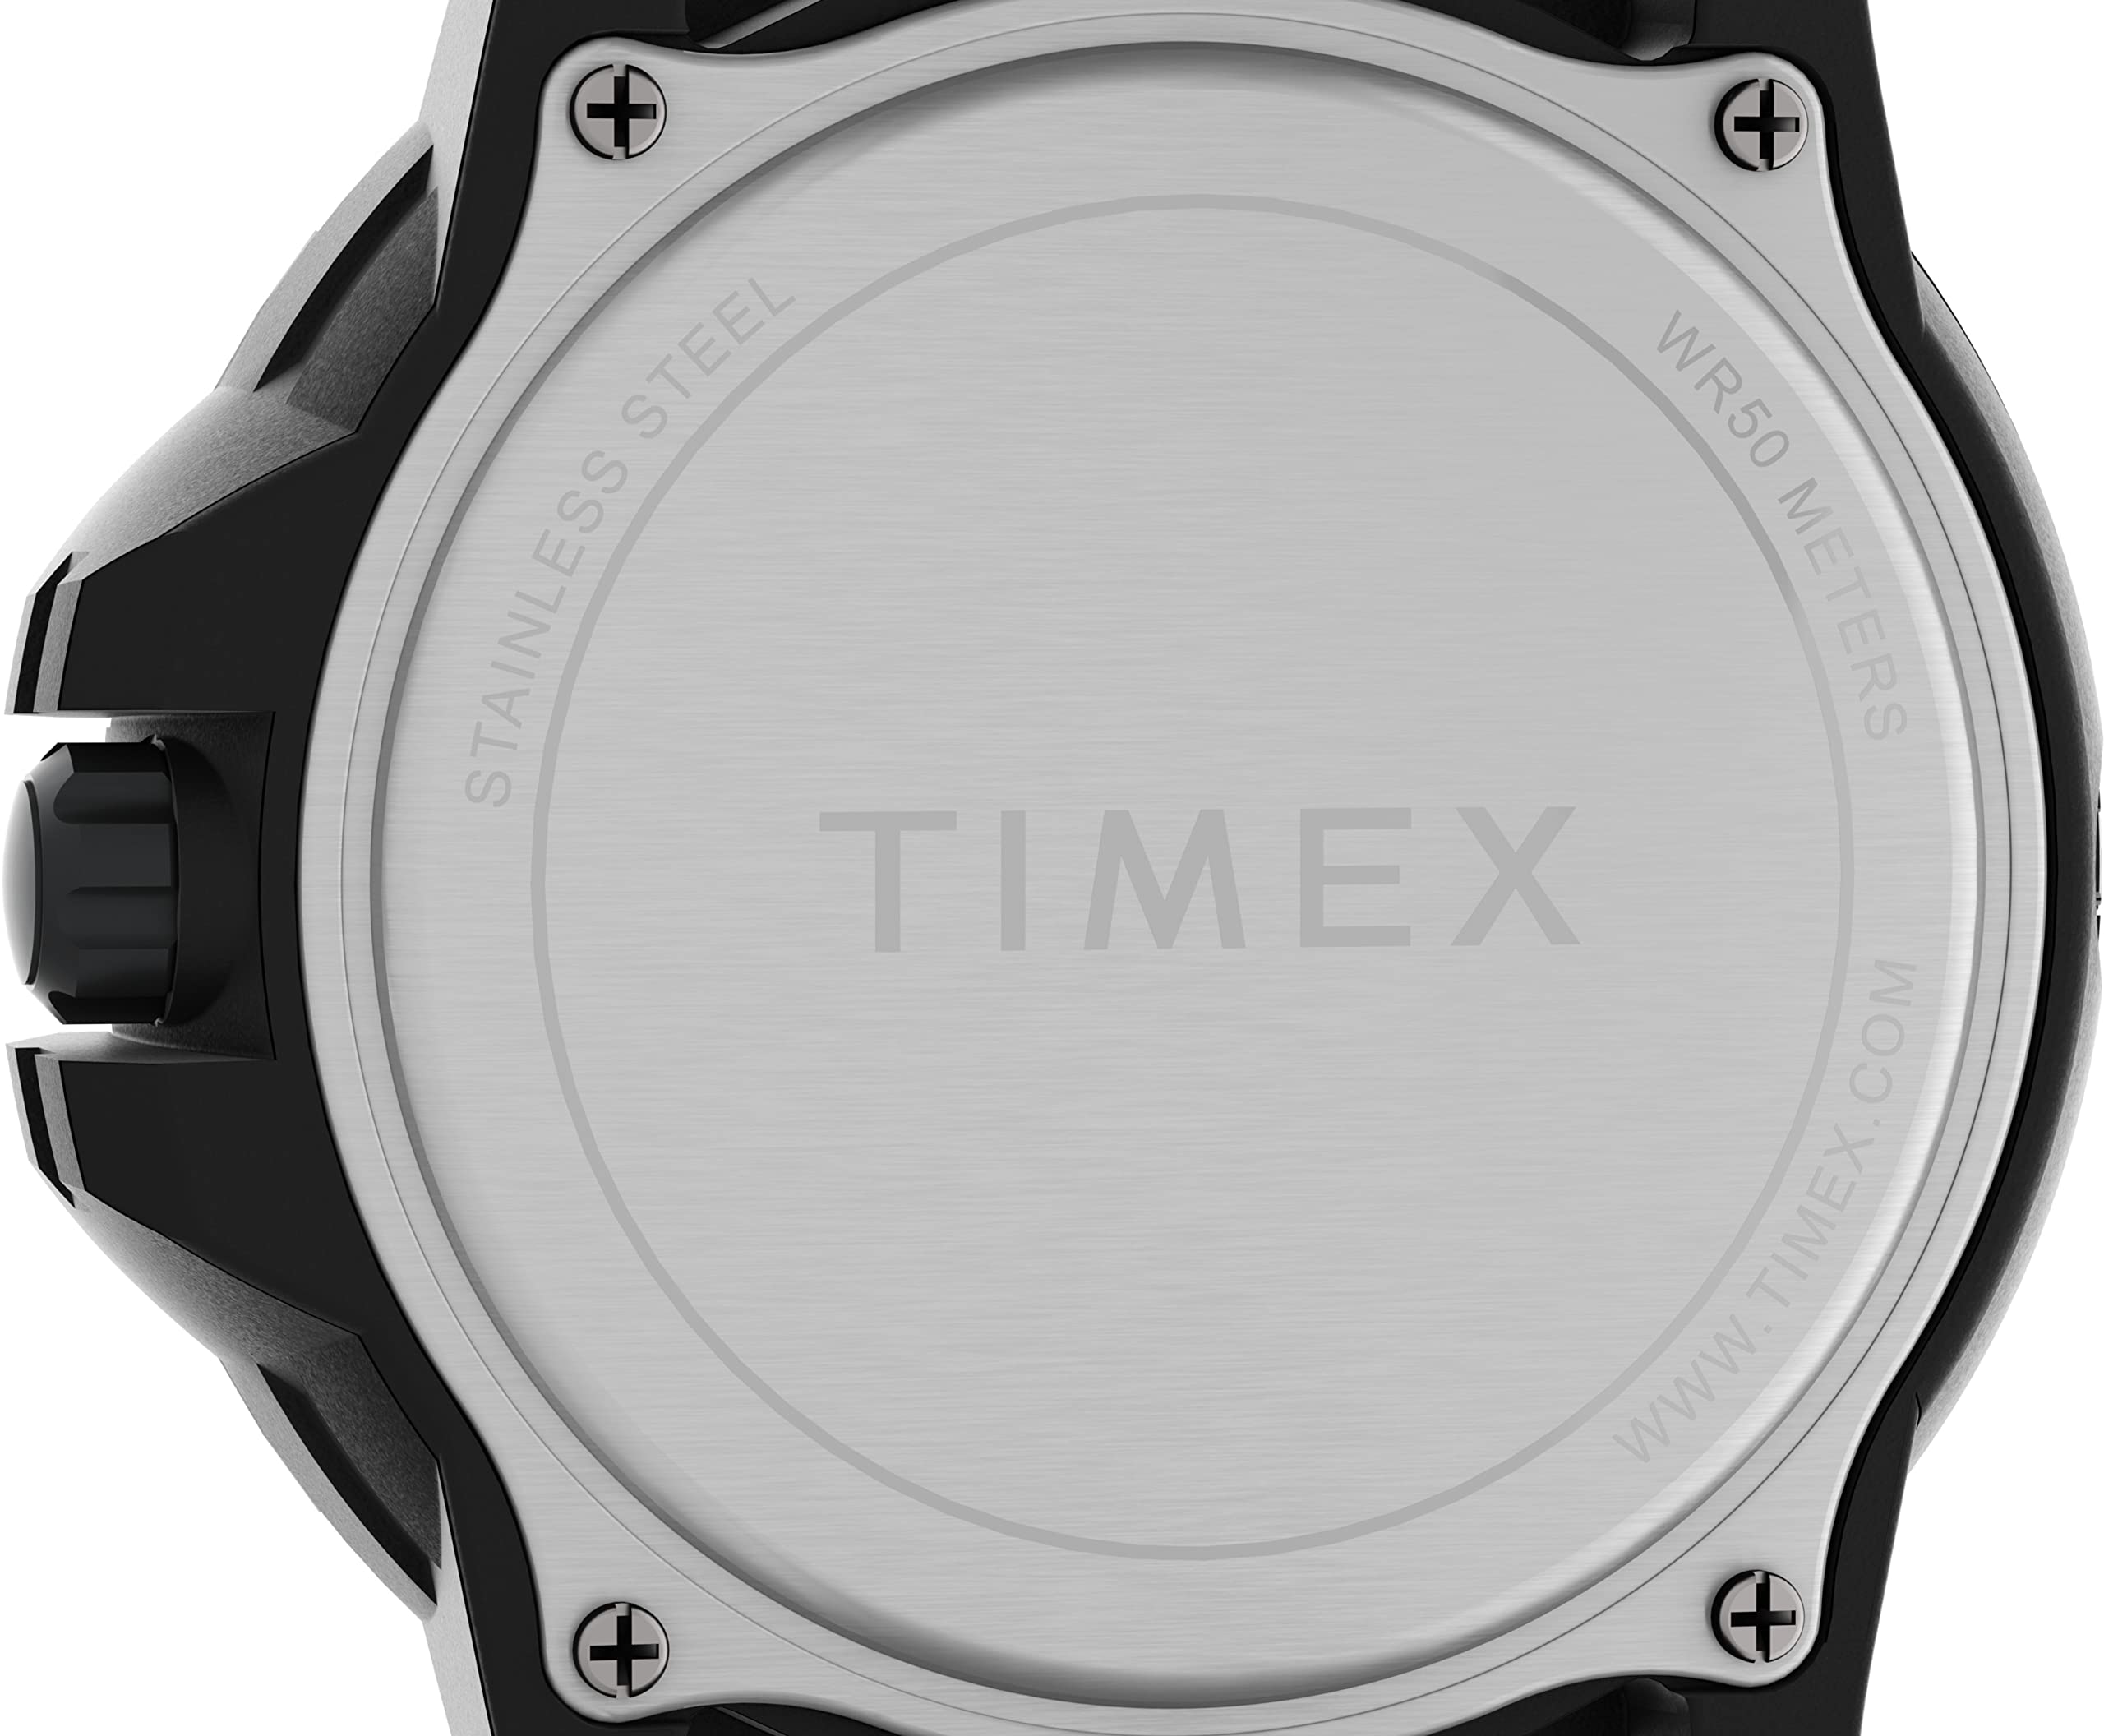 Timex Men's Expedition Gallatin 44mm Watch – Black Case Black Dial with Black Silicone Strap